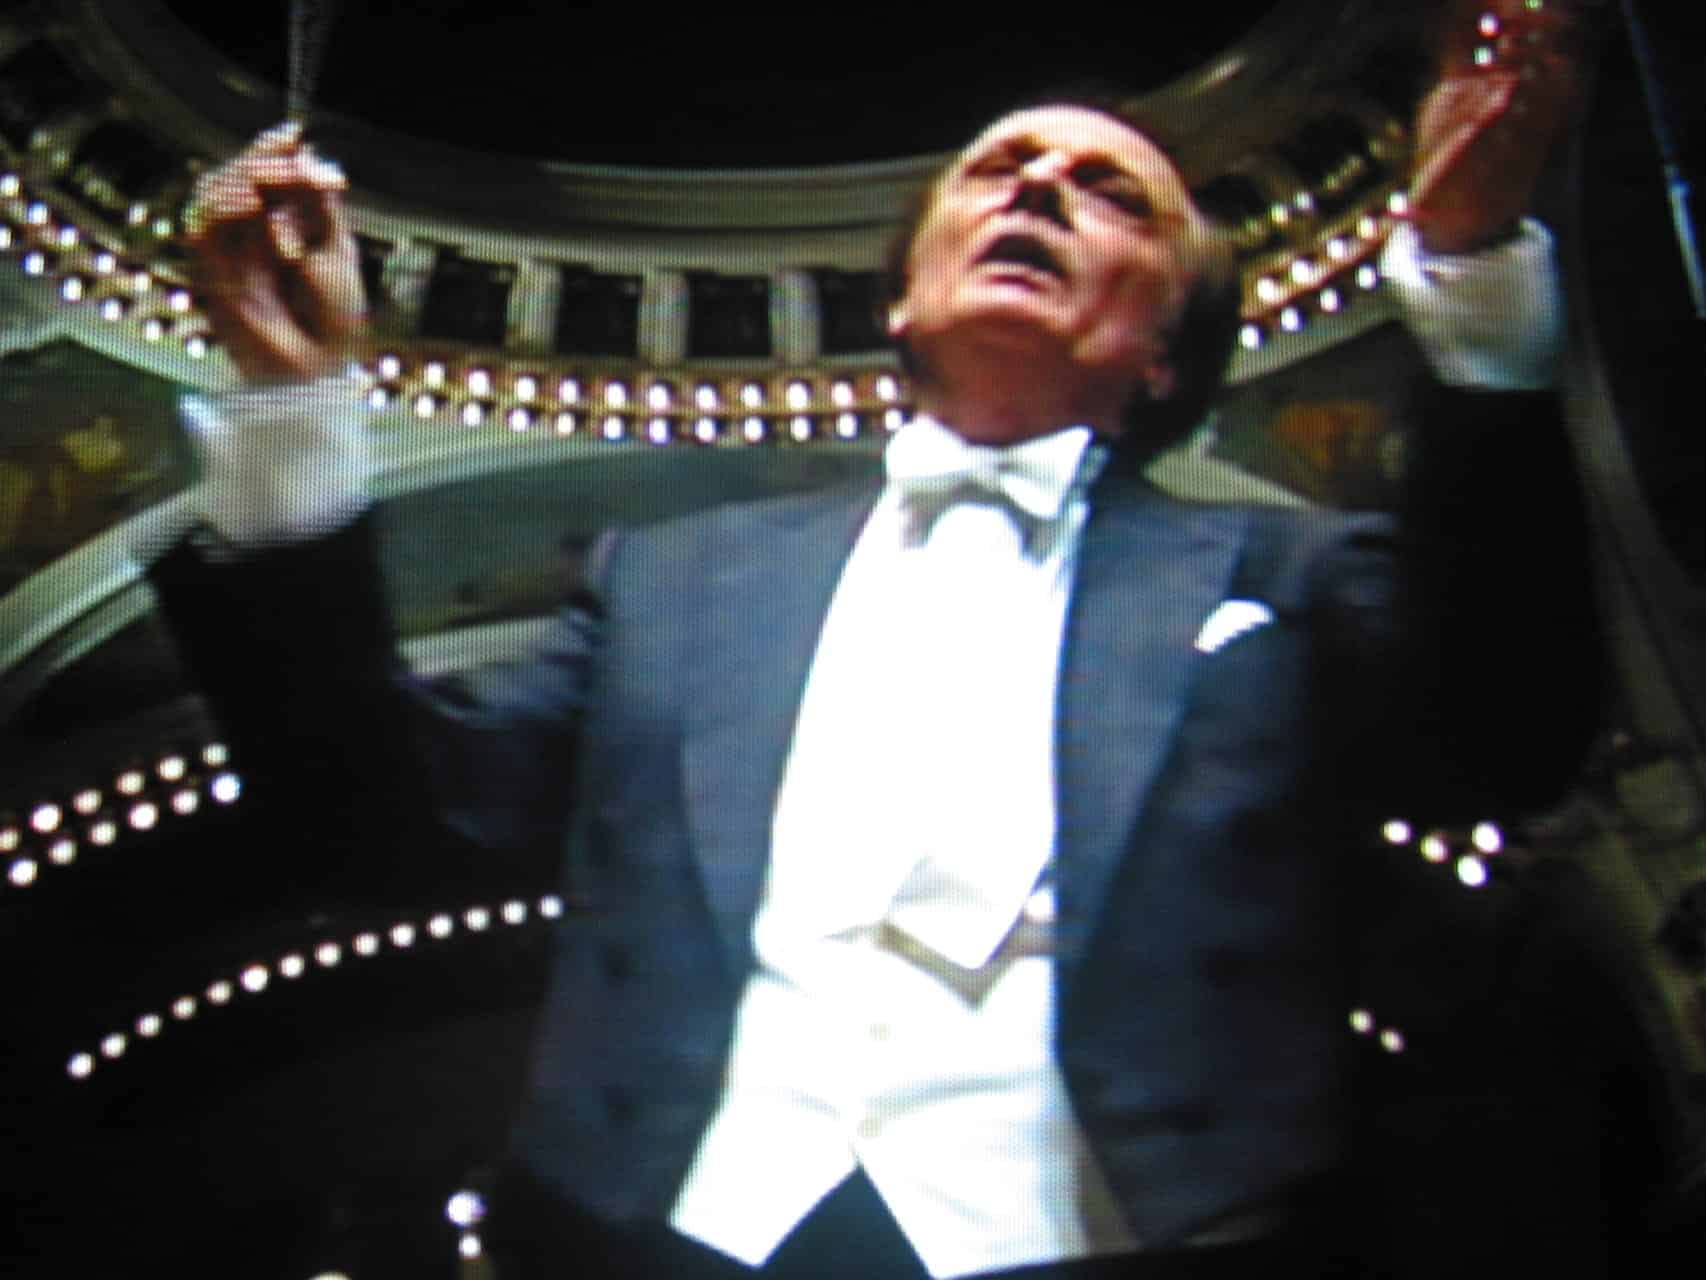 Just in: A much-loved conductor dies at 87